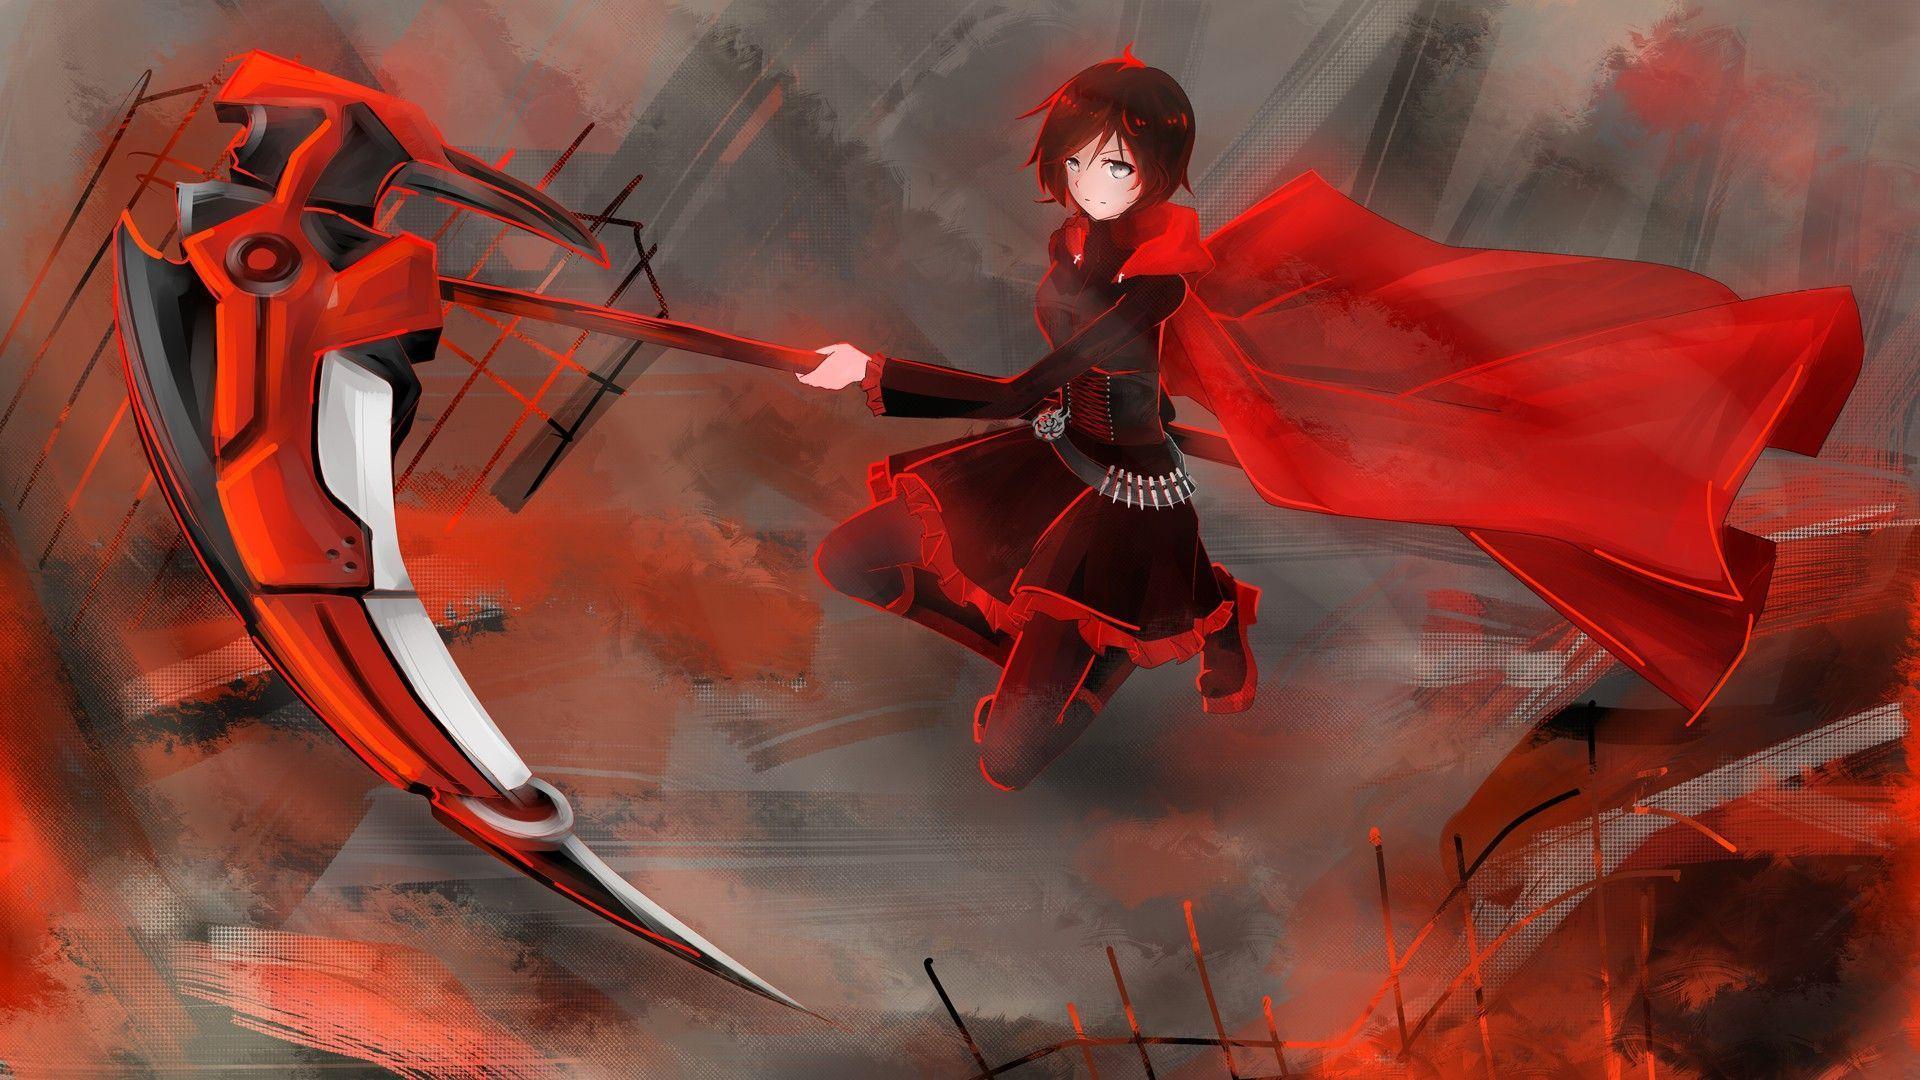 1000+ image about RWBY